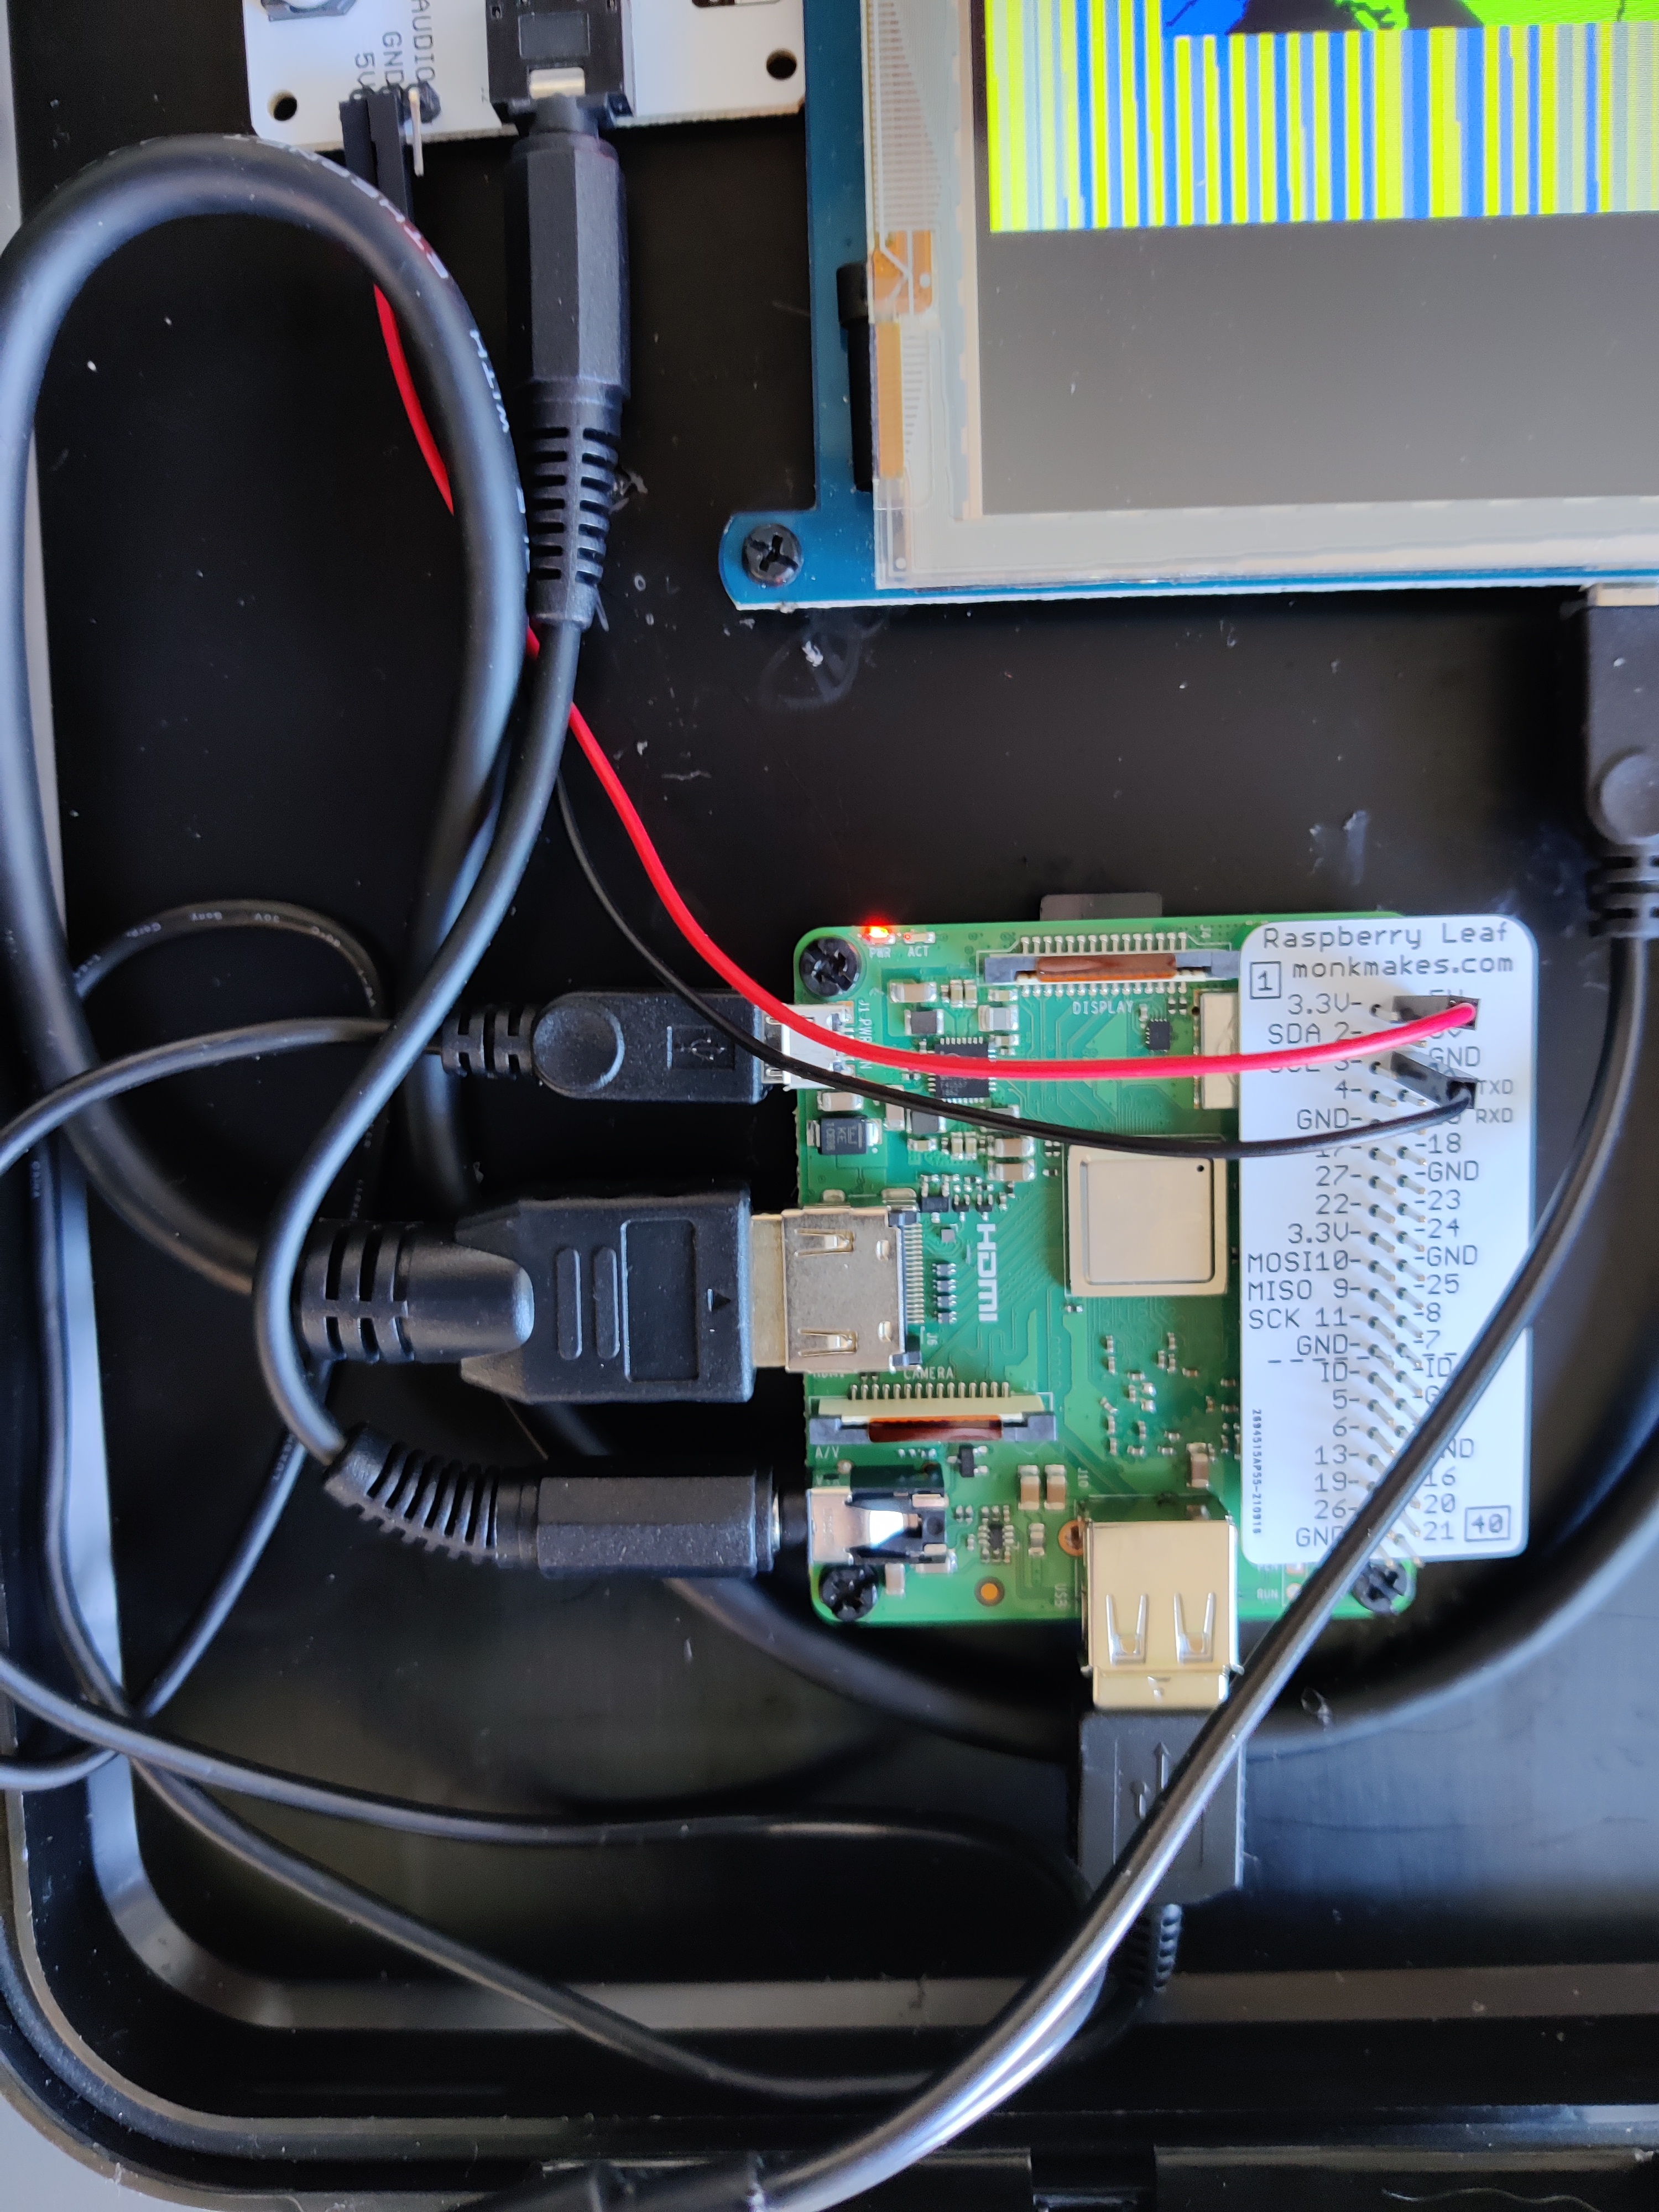 A close-up of the Raspberry Pi and the wiring